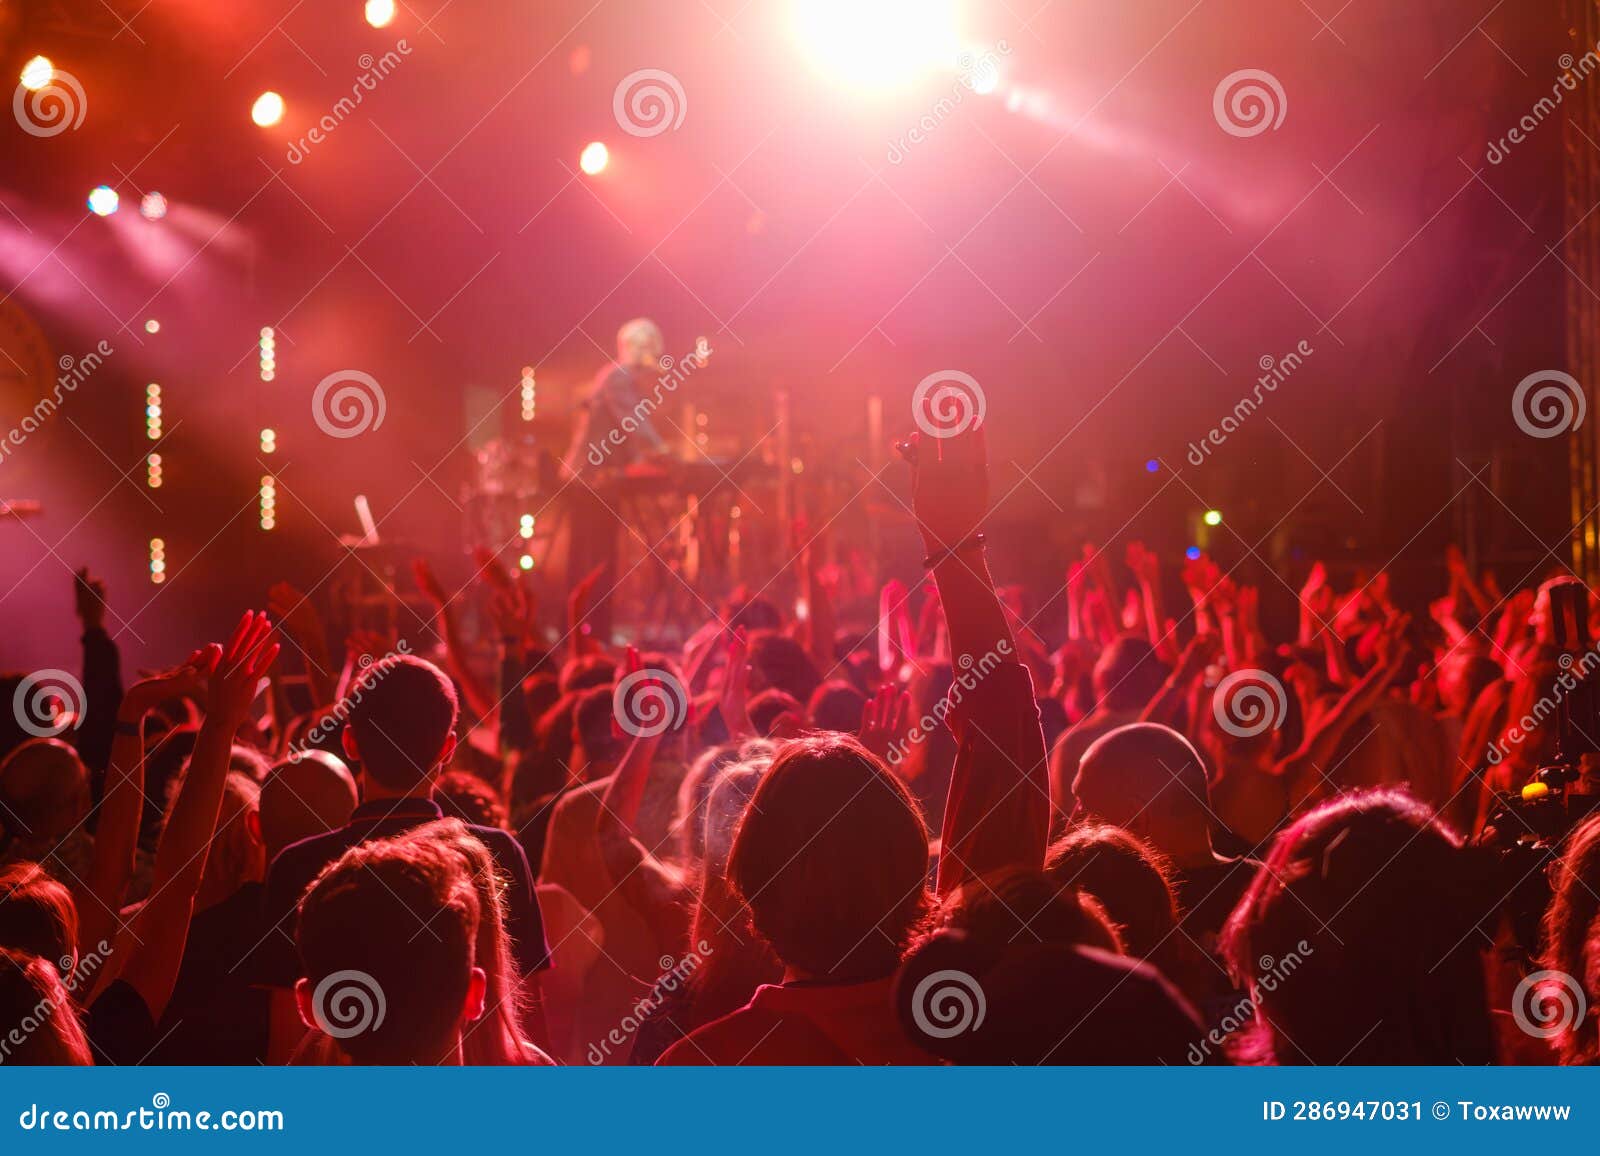 Crowd Dancing To Music during Concert in Neon Lights Stock Image ...